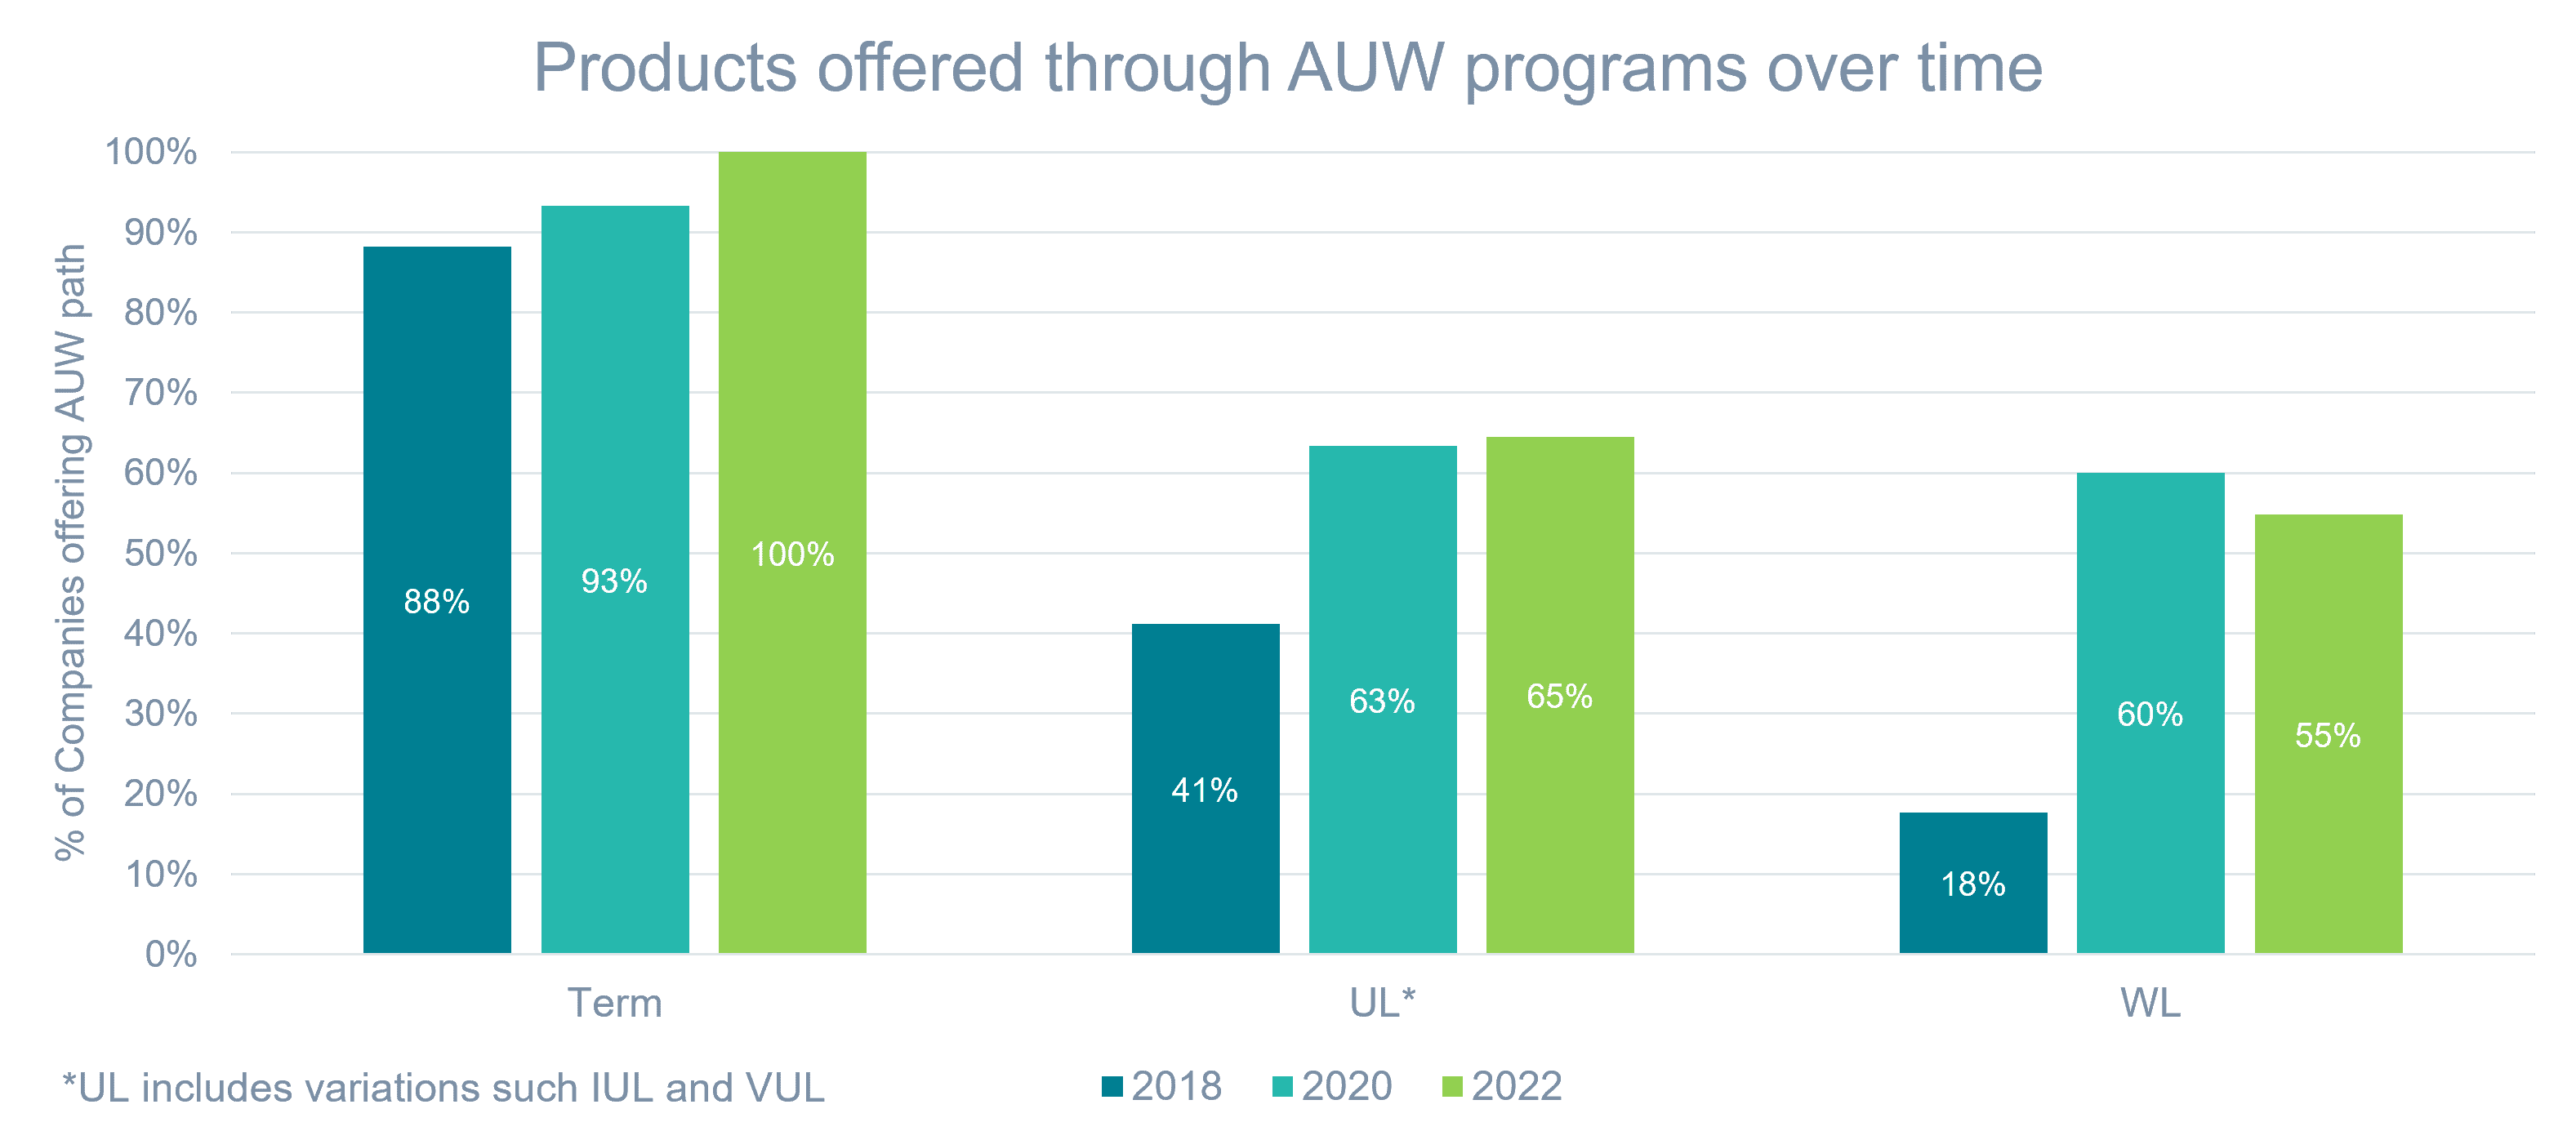 Figure 2: Product Types Offered Through AUW Programs Over Time